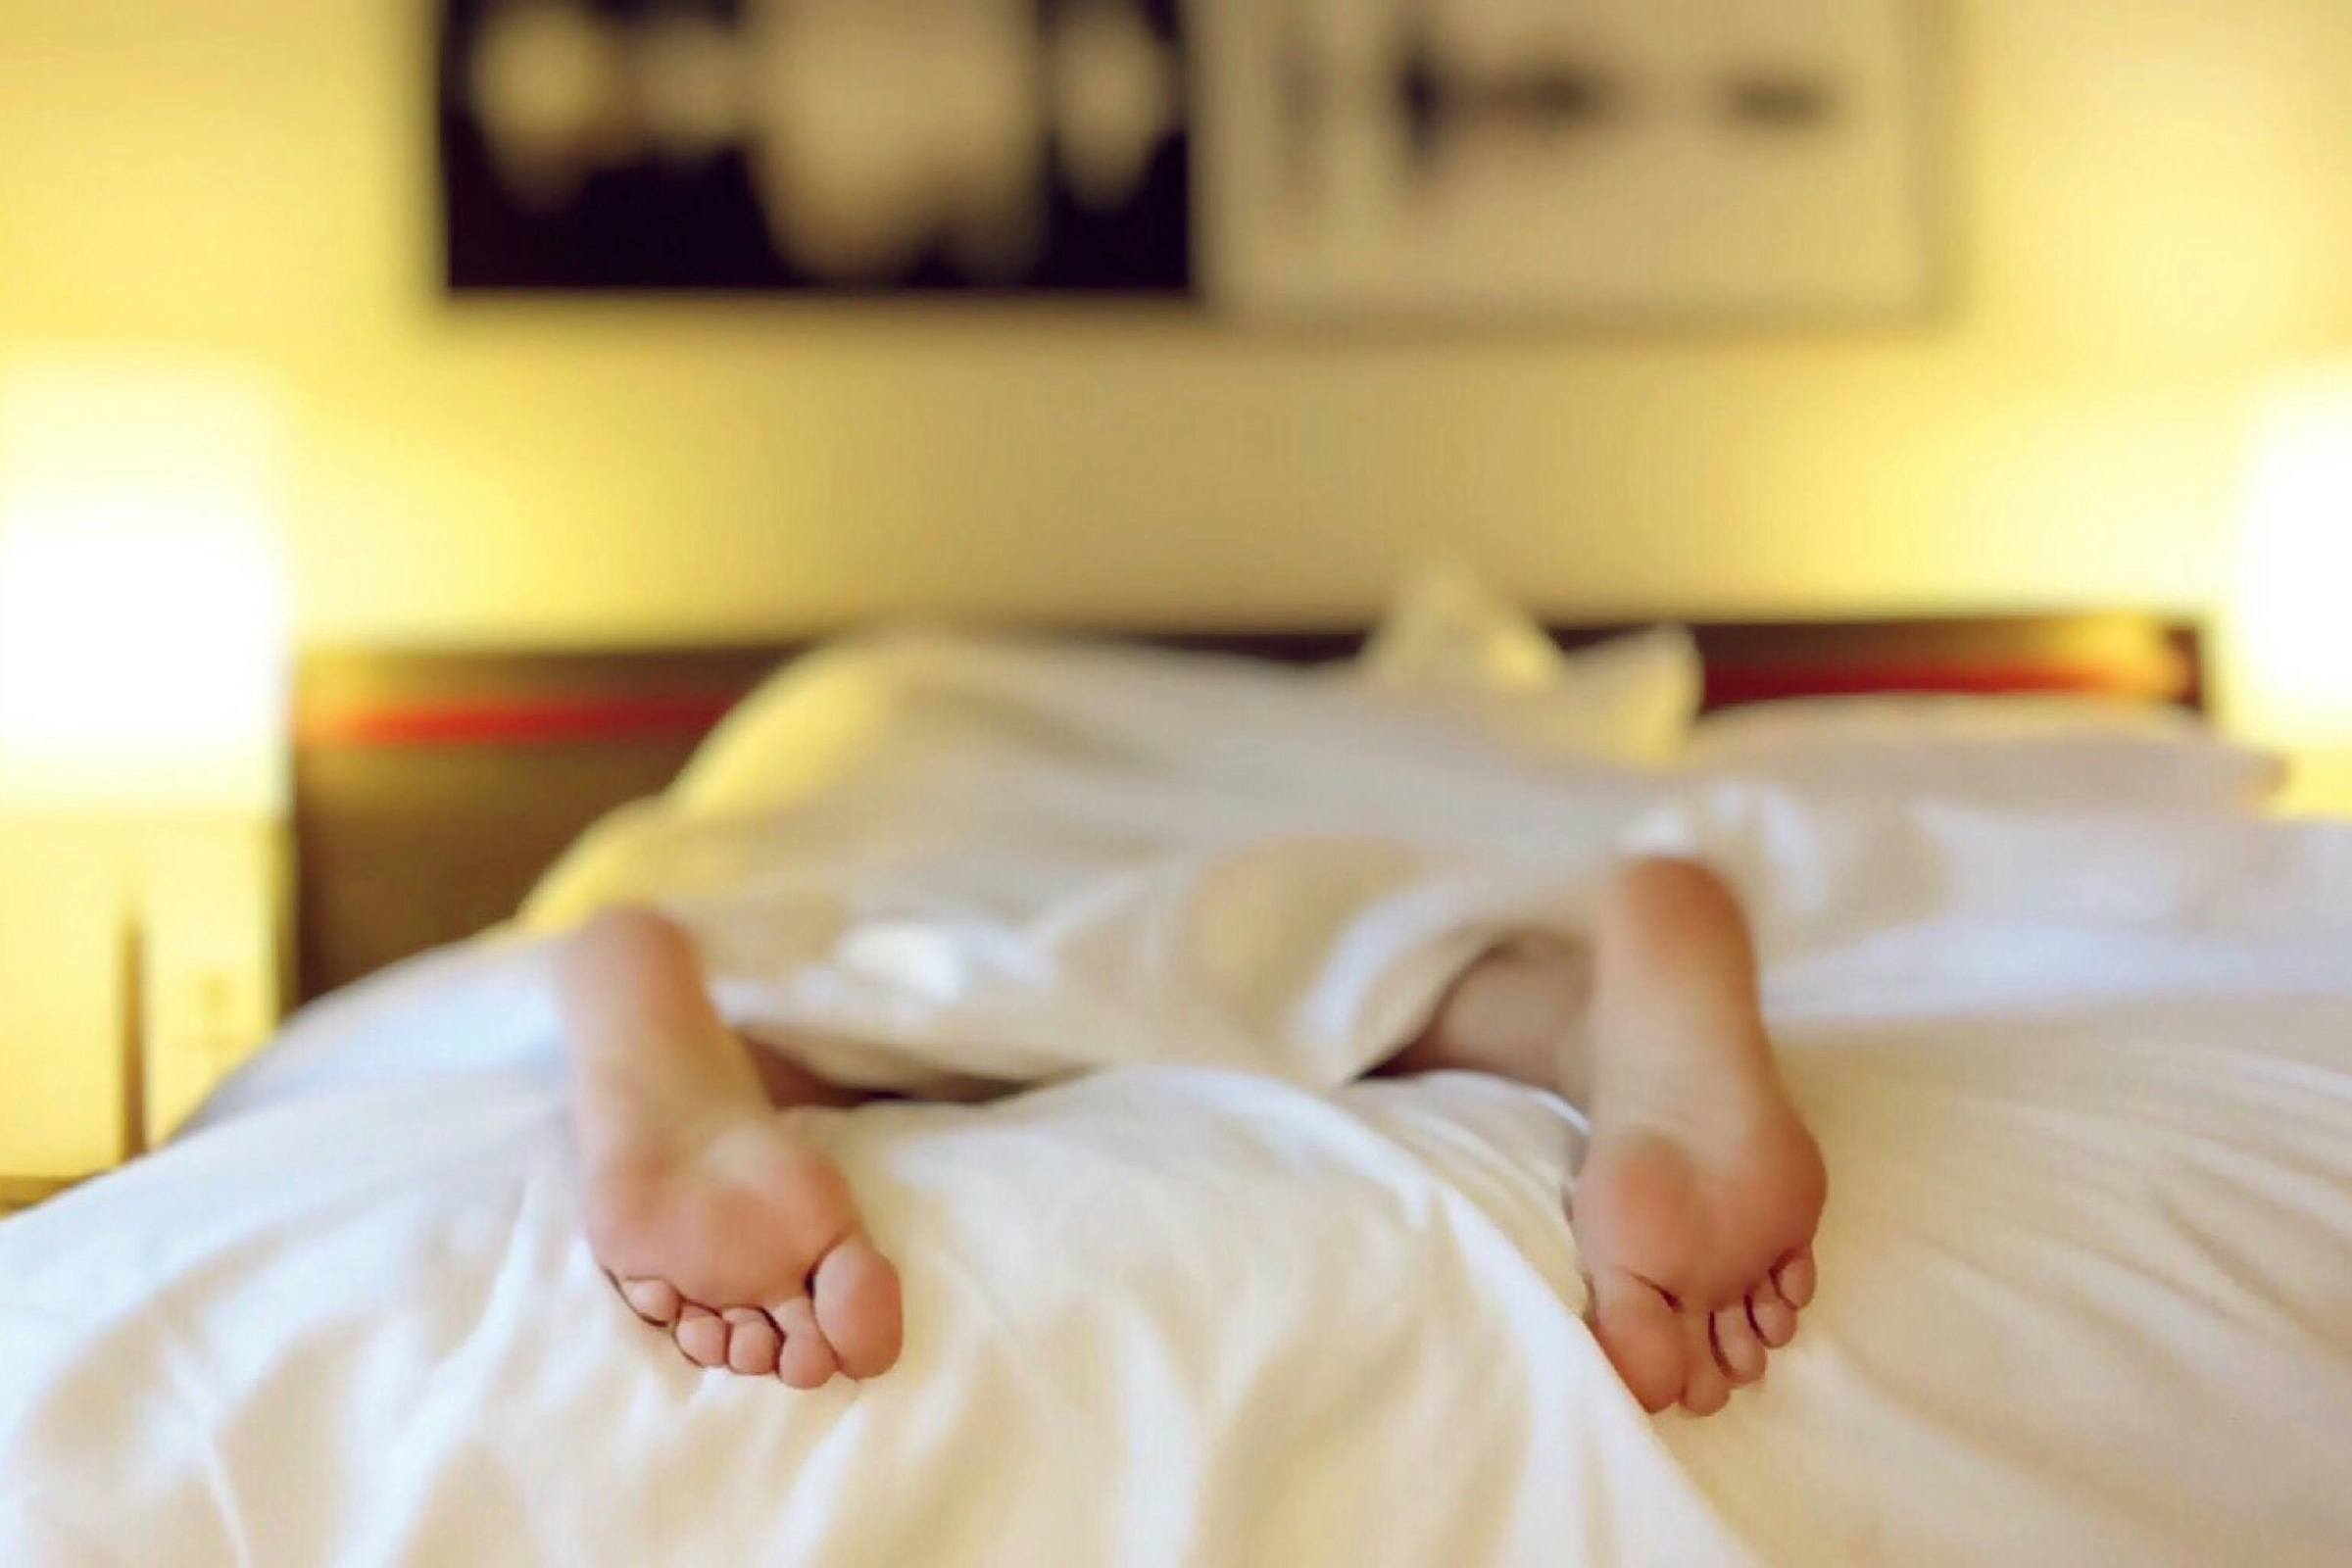 Photo of feet sticking out of a bed representing someone who can't sleep. APP CME Sleep Disorder